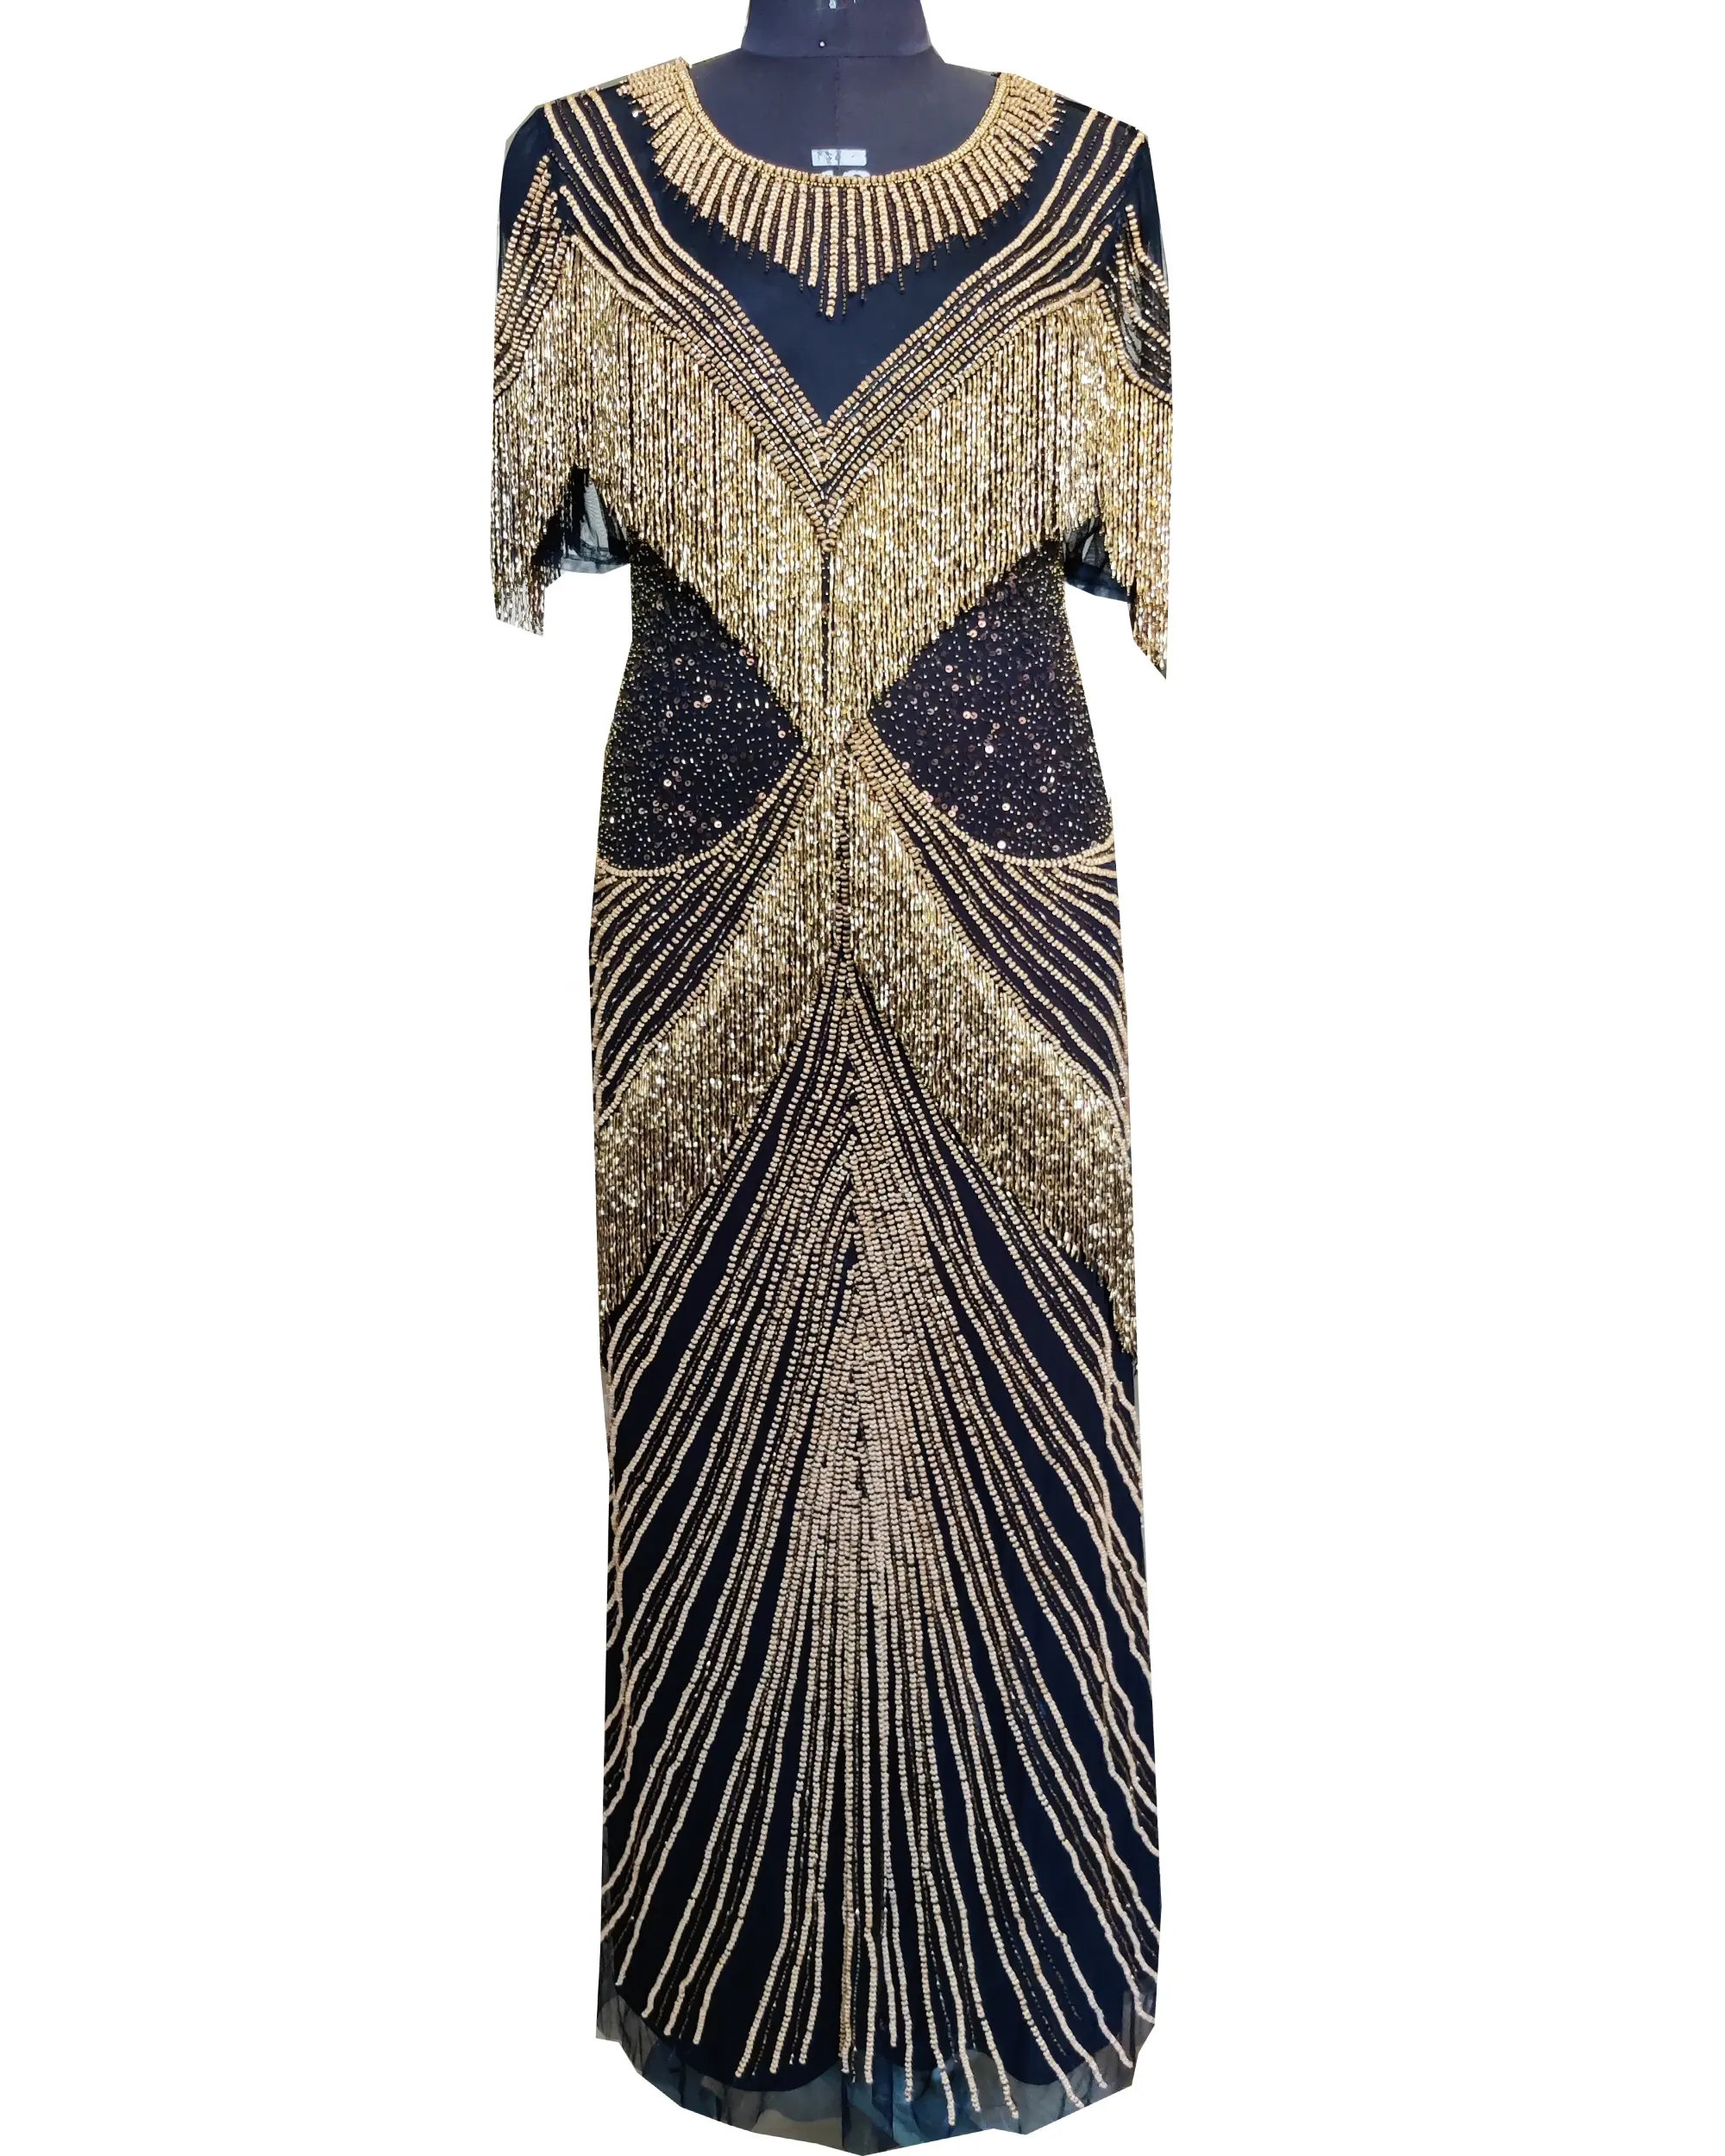 Very Beautiful Egyptian Design Hand Embroidered Fringed Design Evening Party Dress